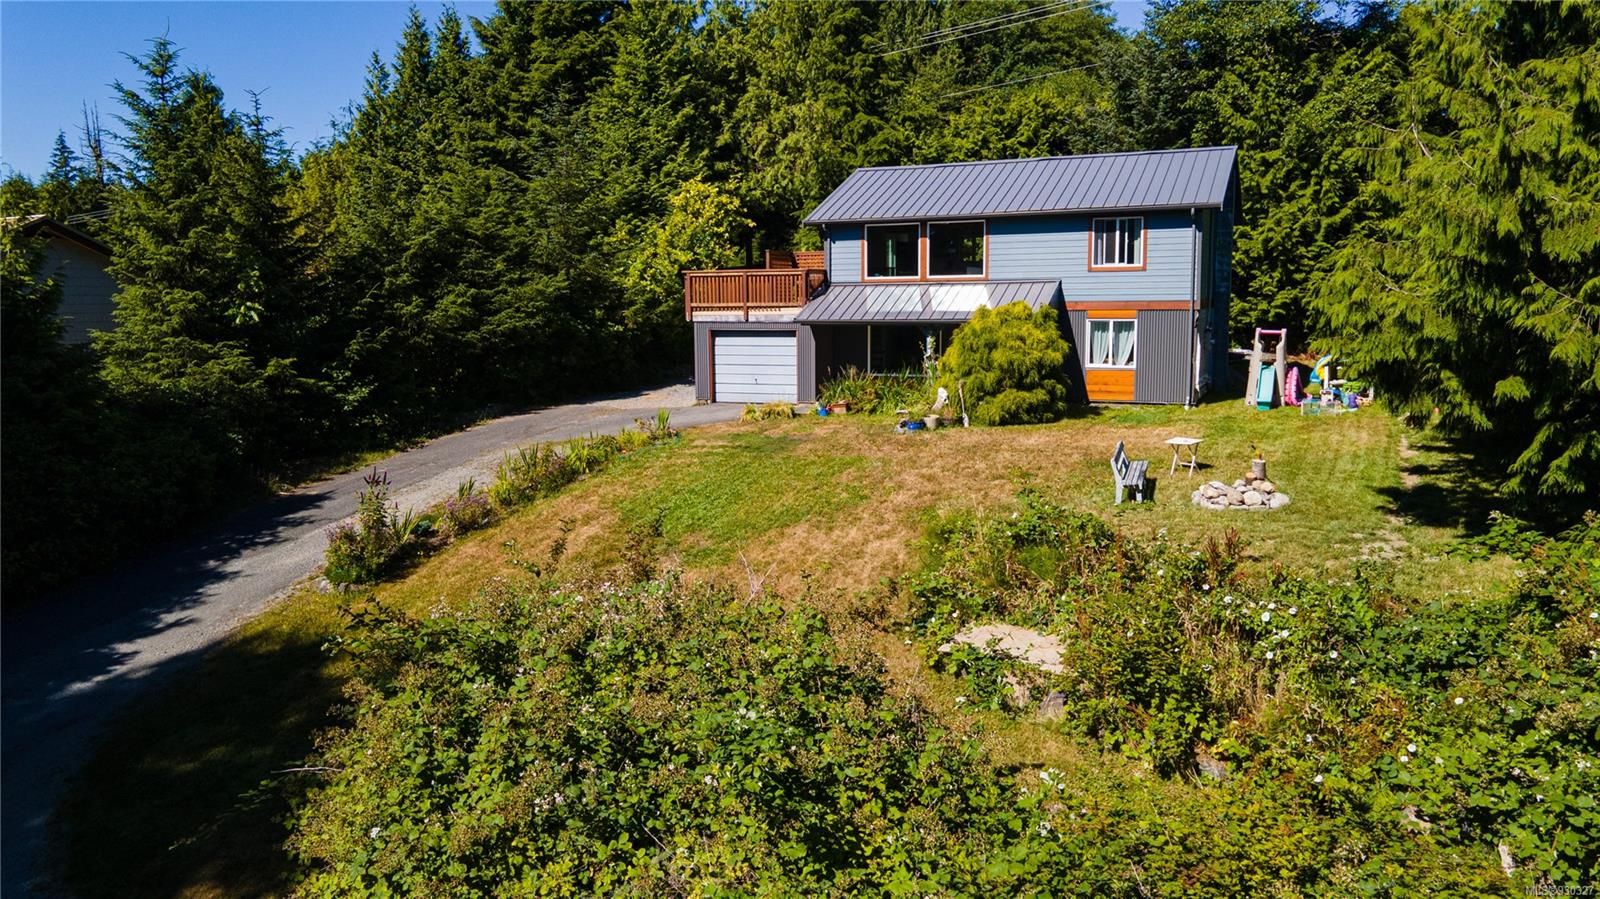 I have sold a property at 262 Karn Ave in Ucluelet
